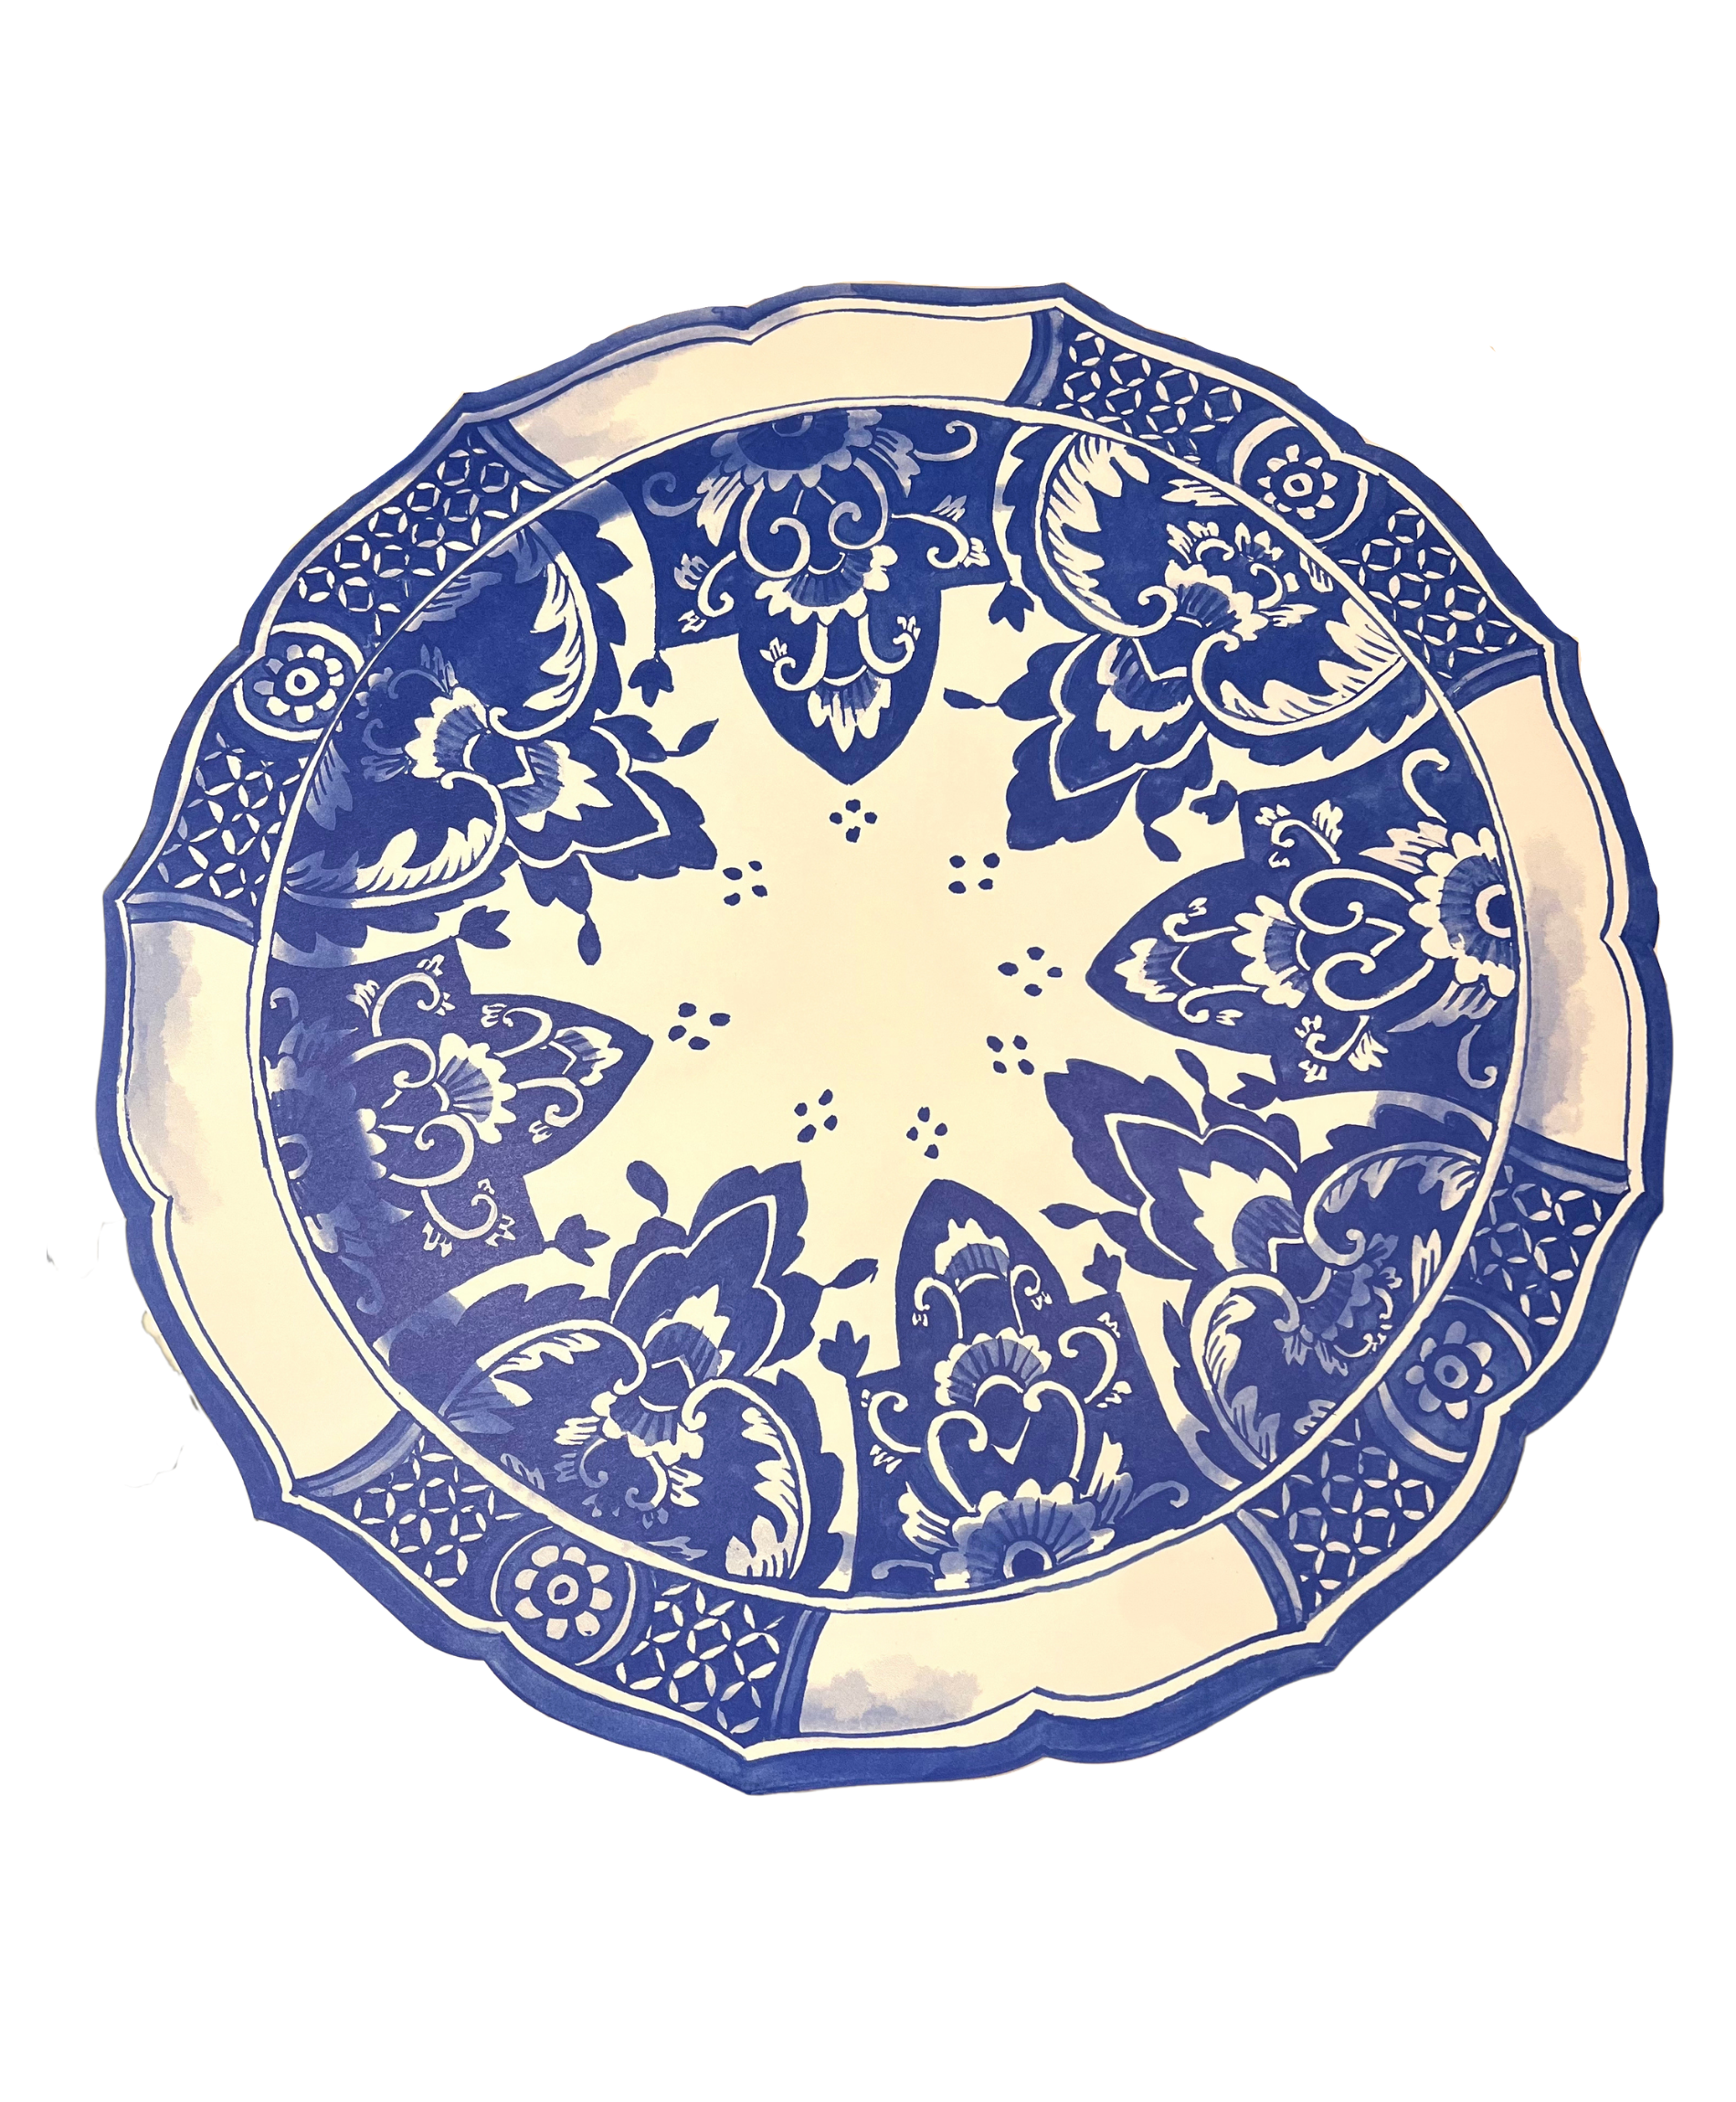 Hester & Cook Die Cut China Blue Placemats Set Of 12